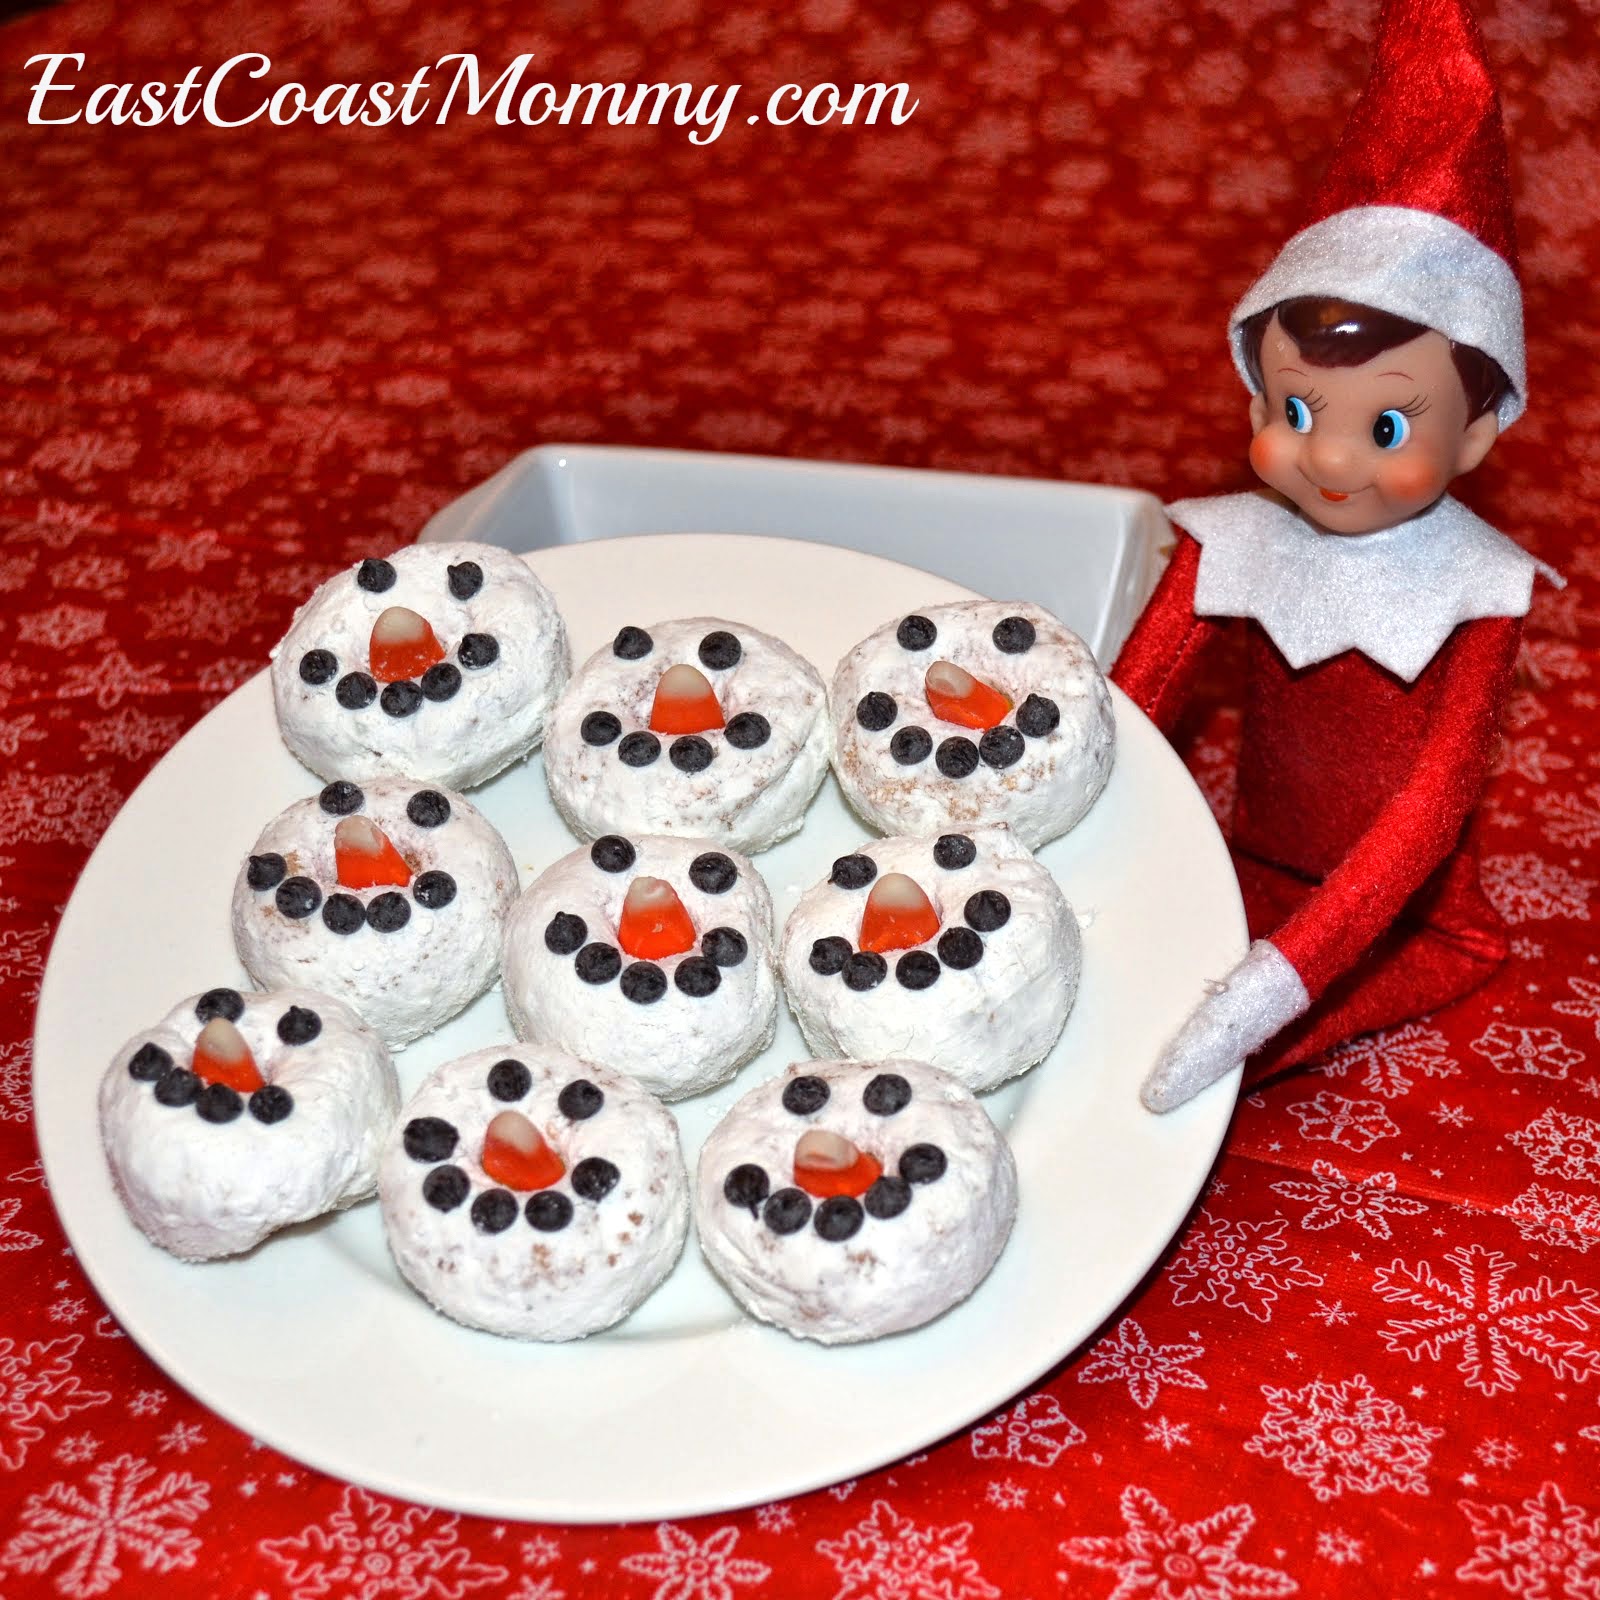 East Coast Mommy: A Month of {Fantastic} Elf on the Shelf Ideas and Printables